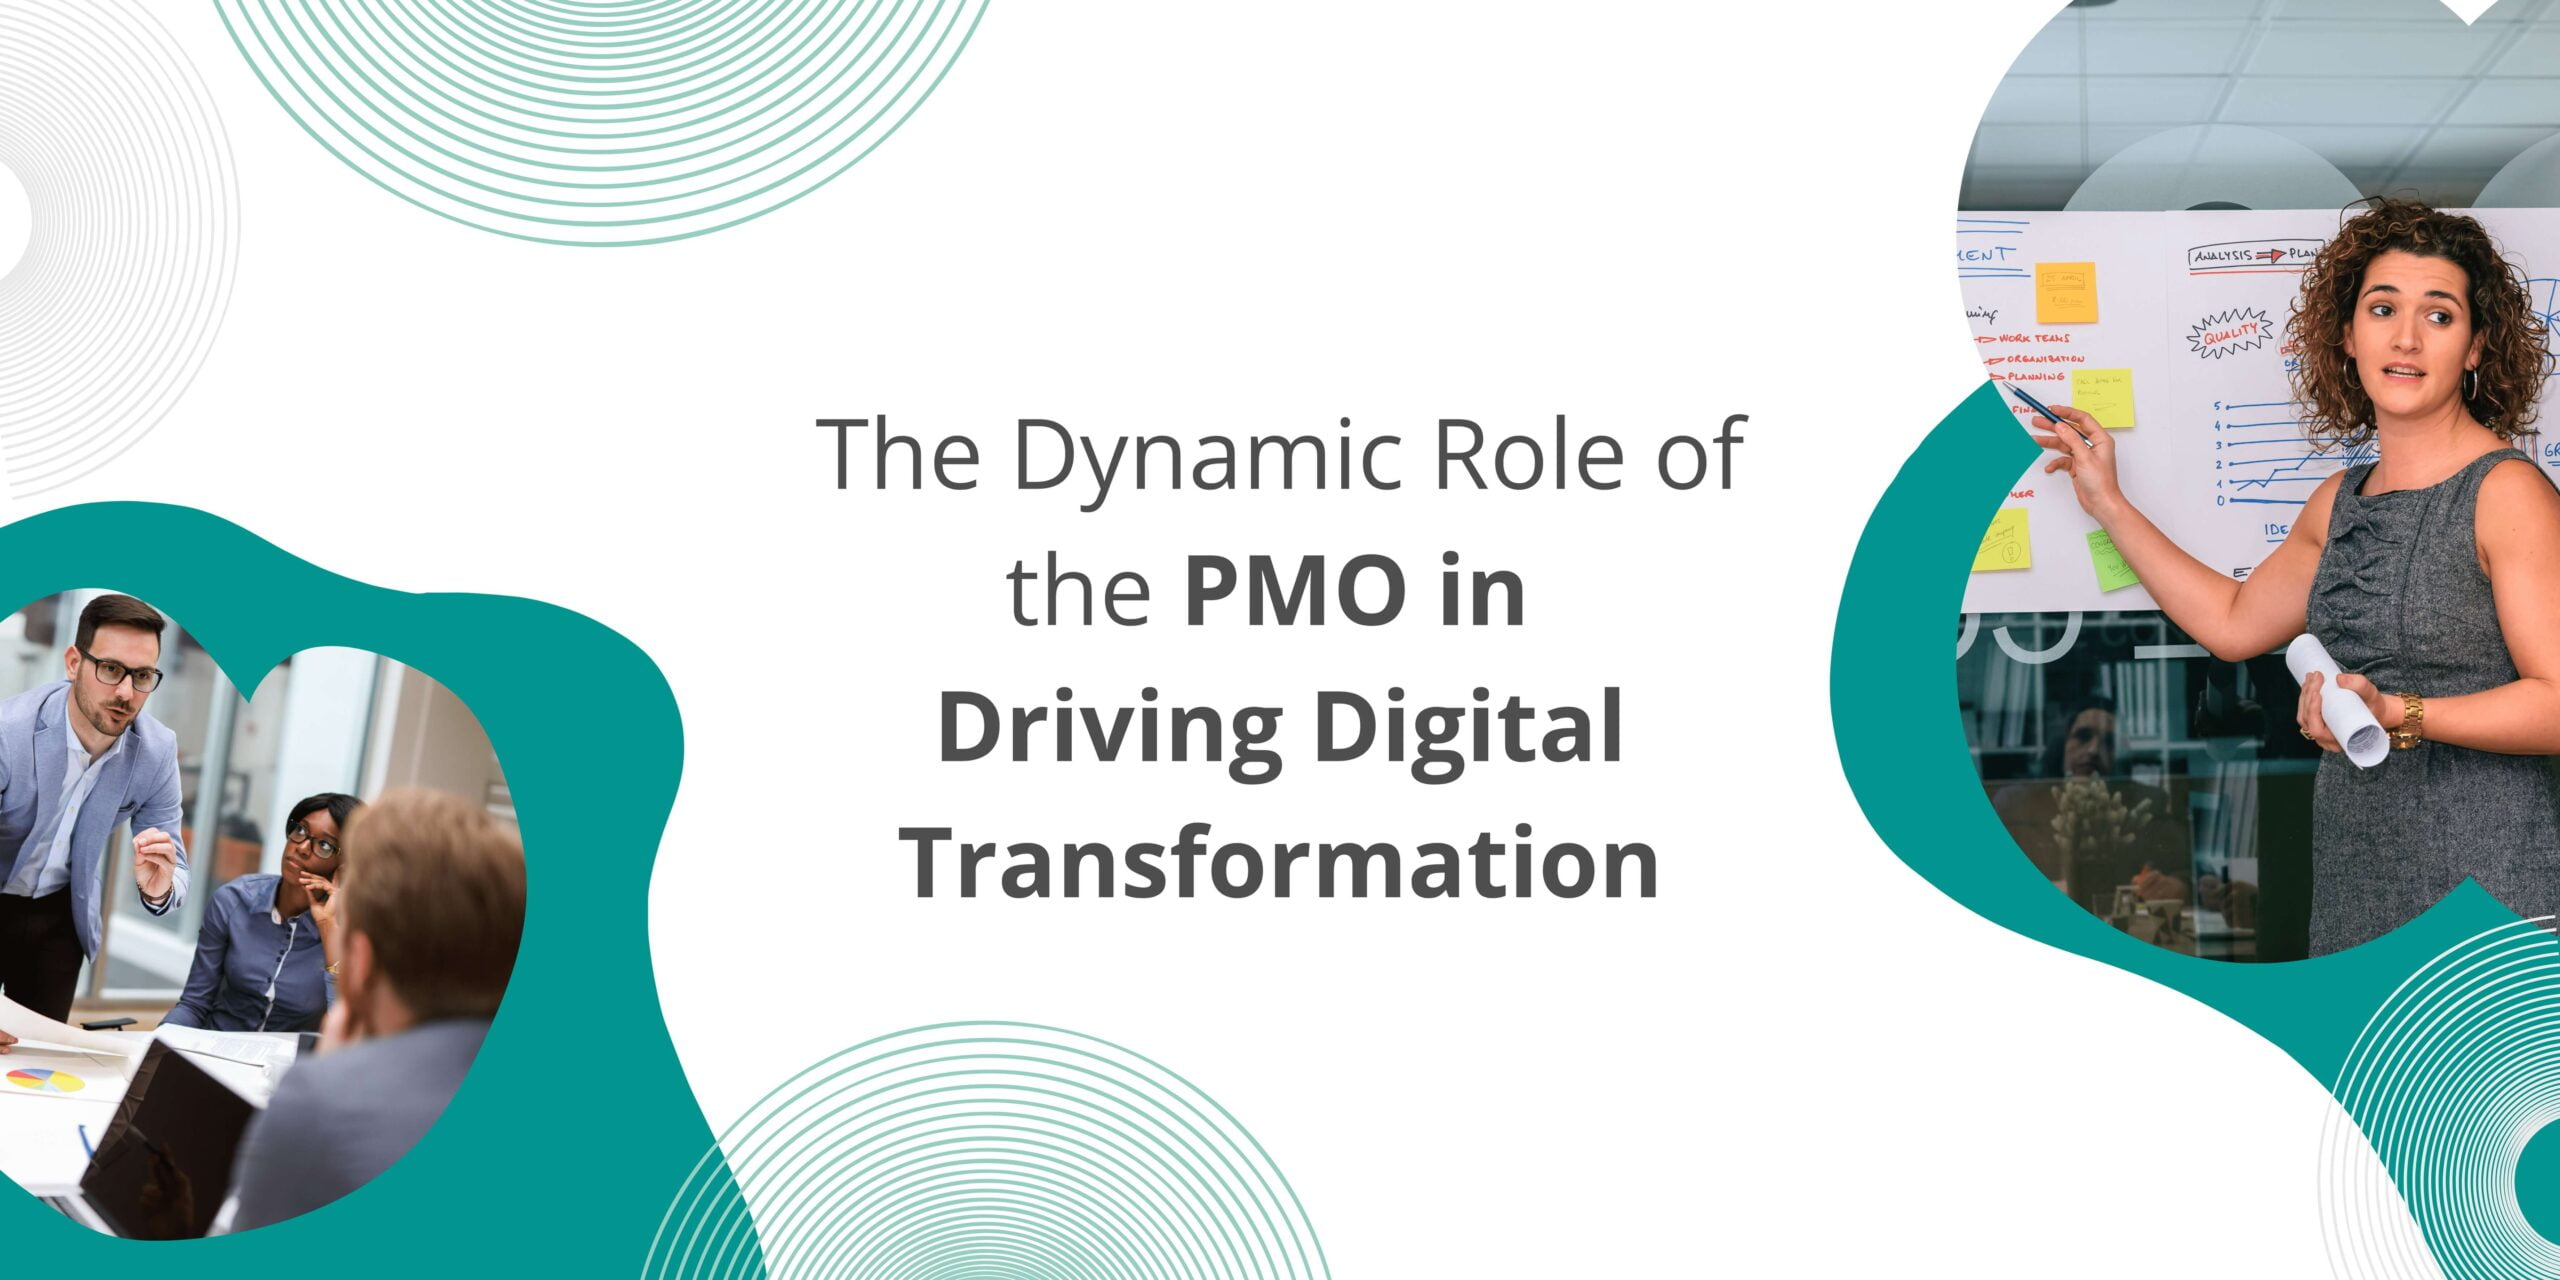 Role of the PMO in Driving Digital Transformation